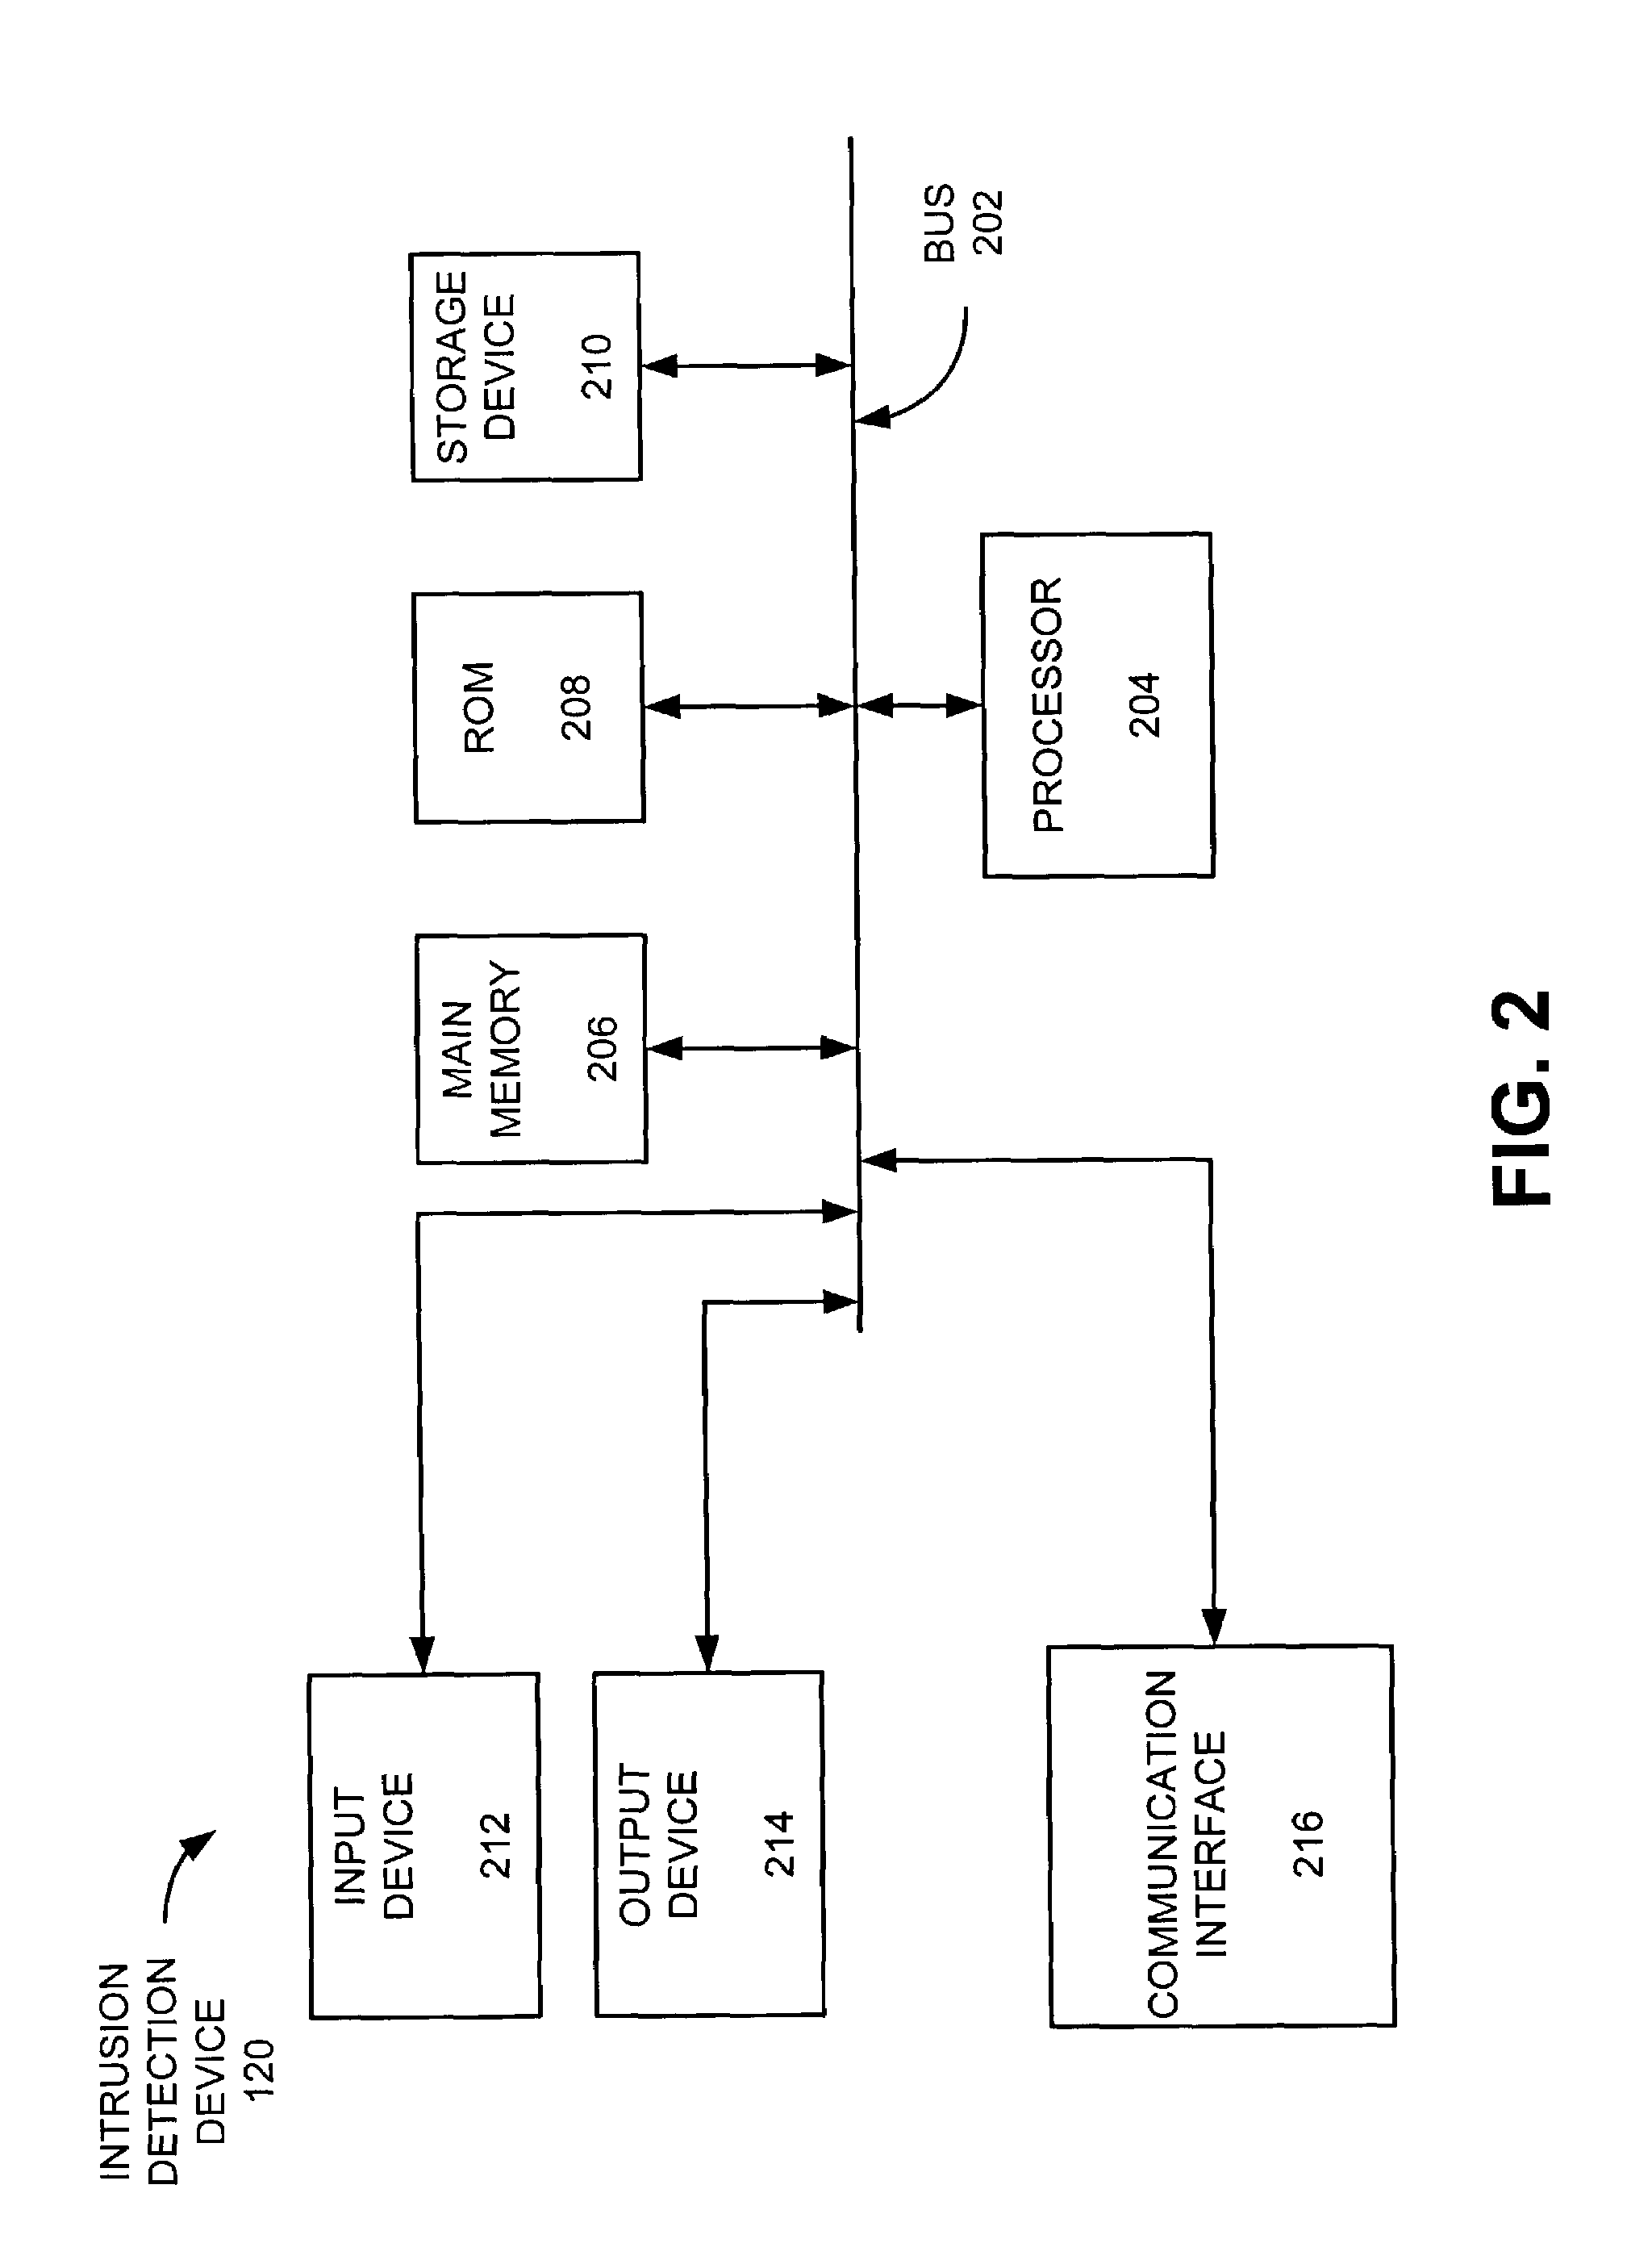 Systems and methods for detecting network intrusions